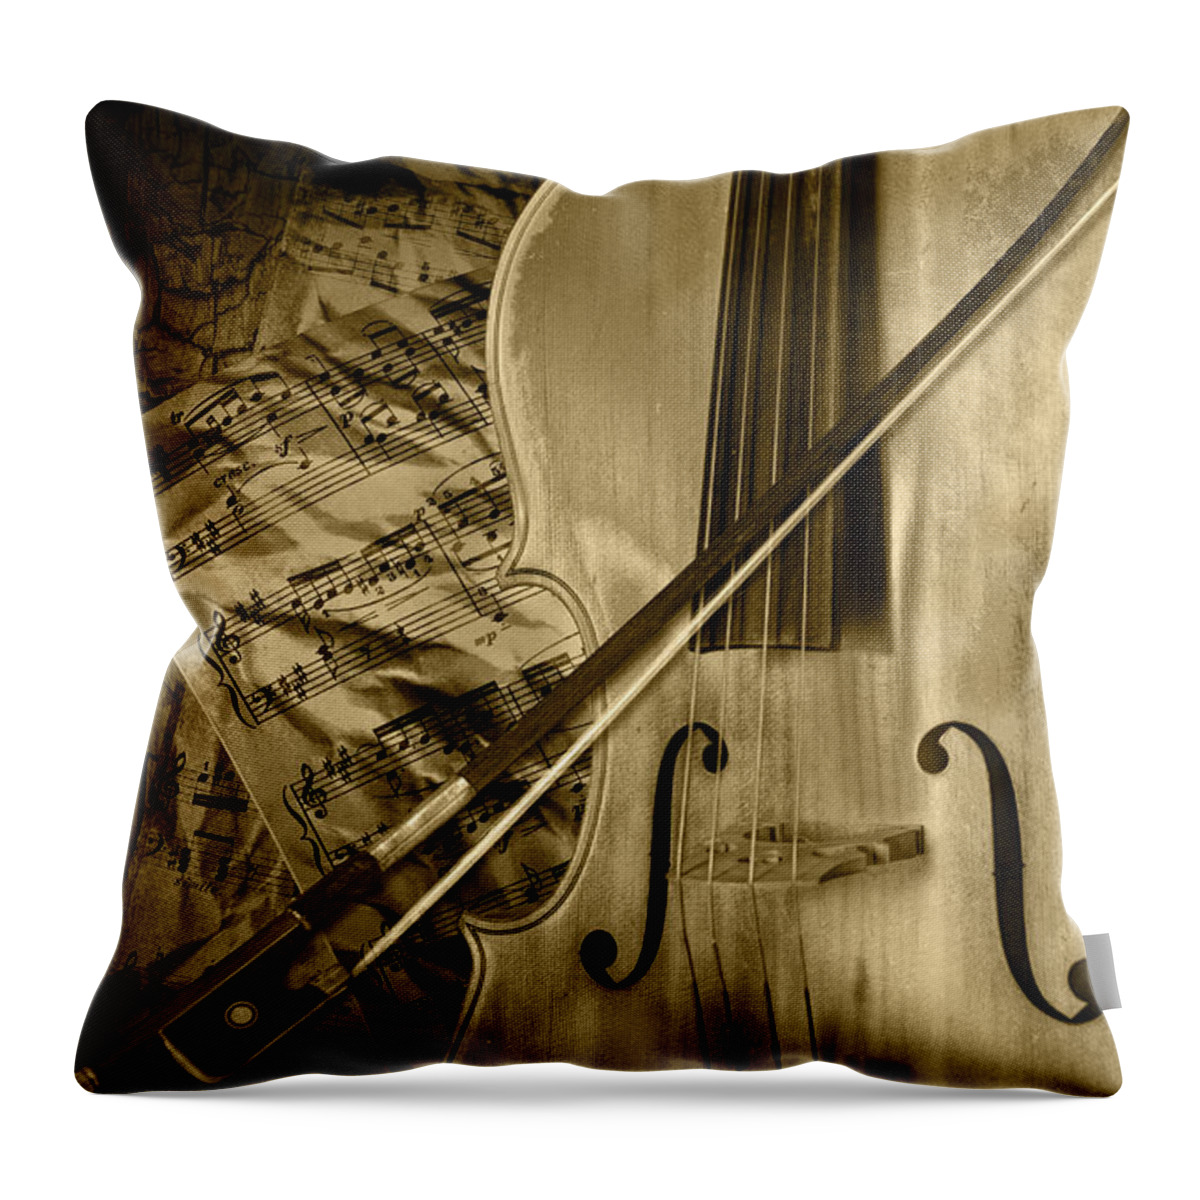 Cello Throw Pillow featuring the photograph Cello Stringed Instrument with Sheet Music and Bow in Sepia by Randall Nyhof